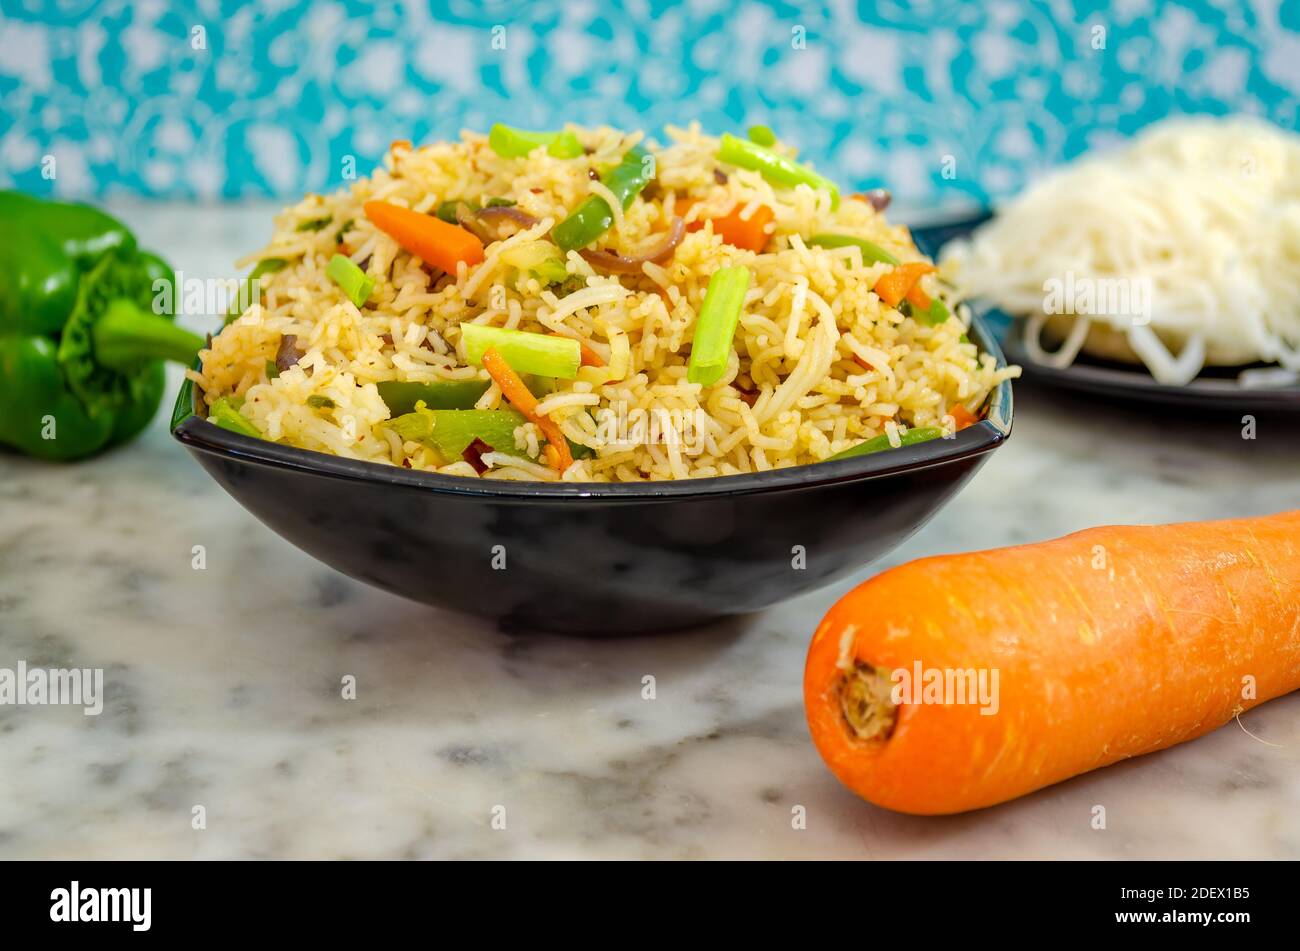 Closeup of Idiyappam Noodles (Indian Rice Noodles) in a black bowl with carrot and capsicum on the side Stock Photo